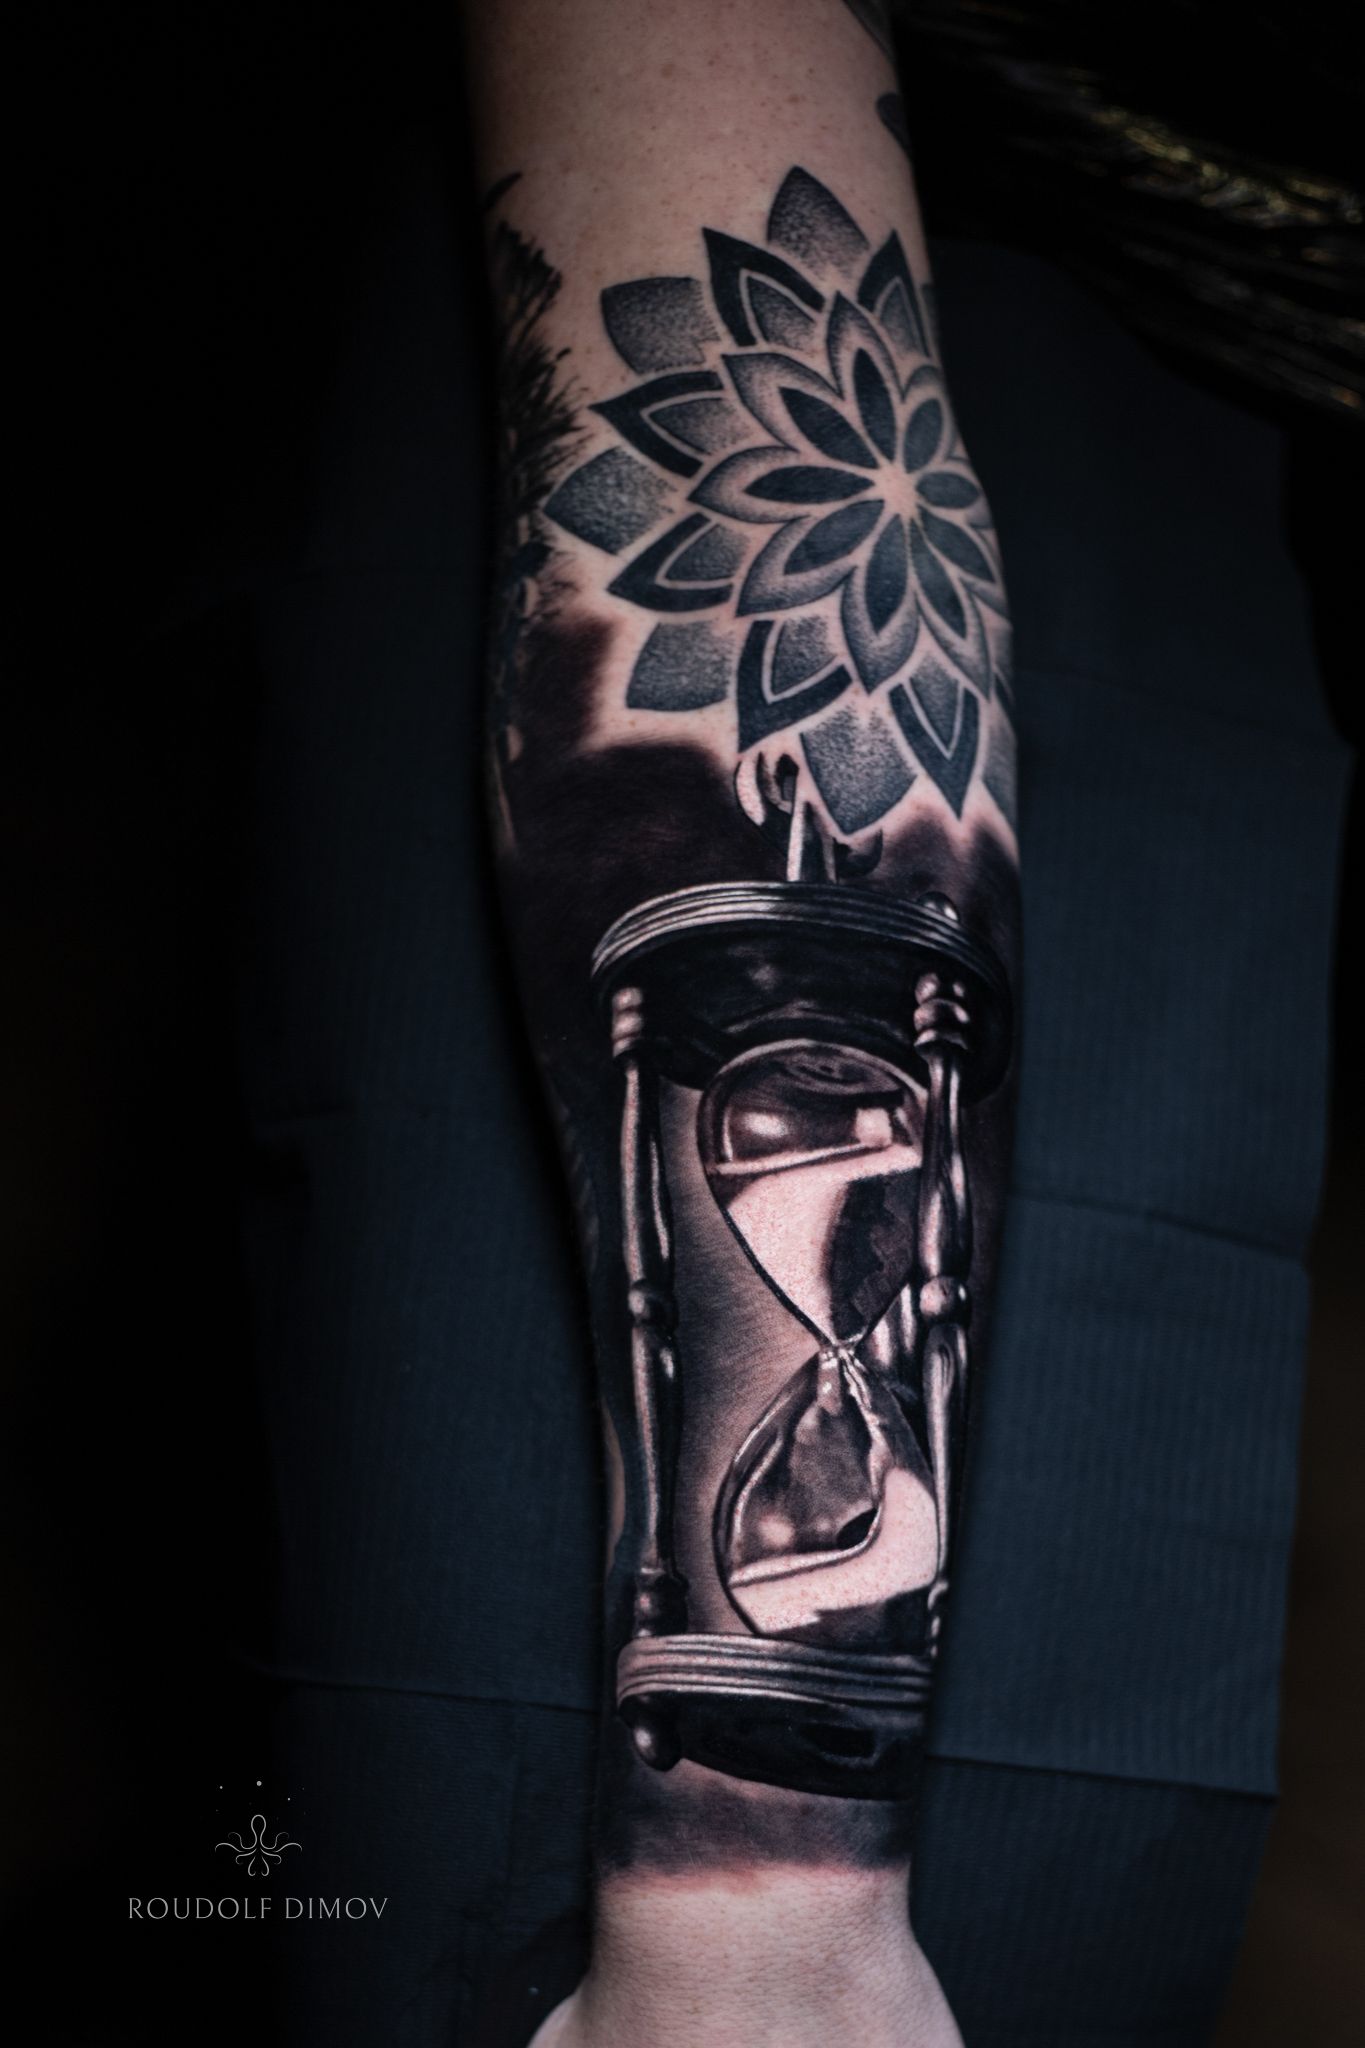 Tattoo uploaded by marcbloechlinger • Hourglass and anchor done by jari  kajaste • Tattoodo